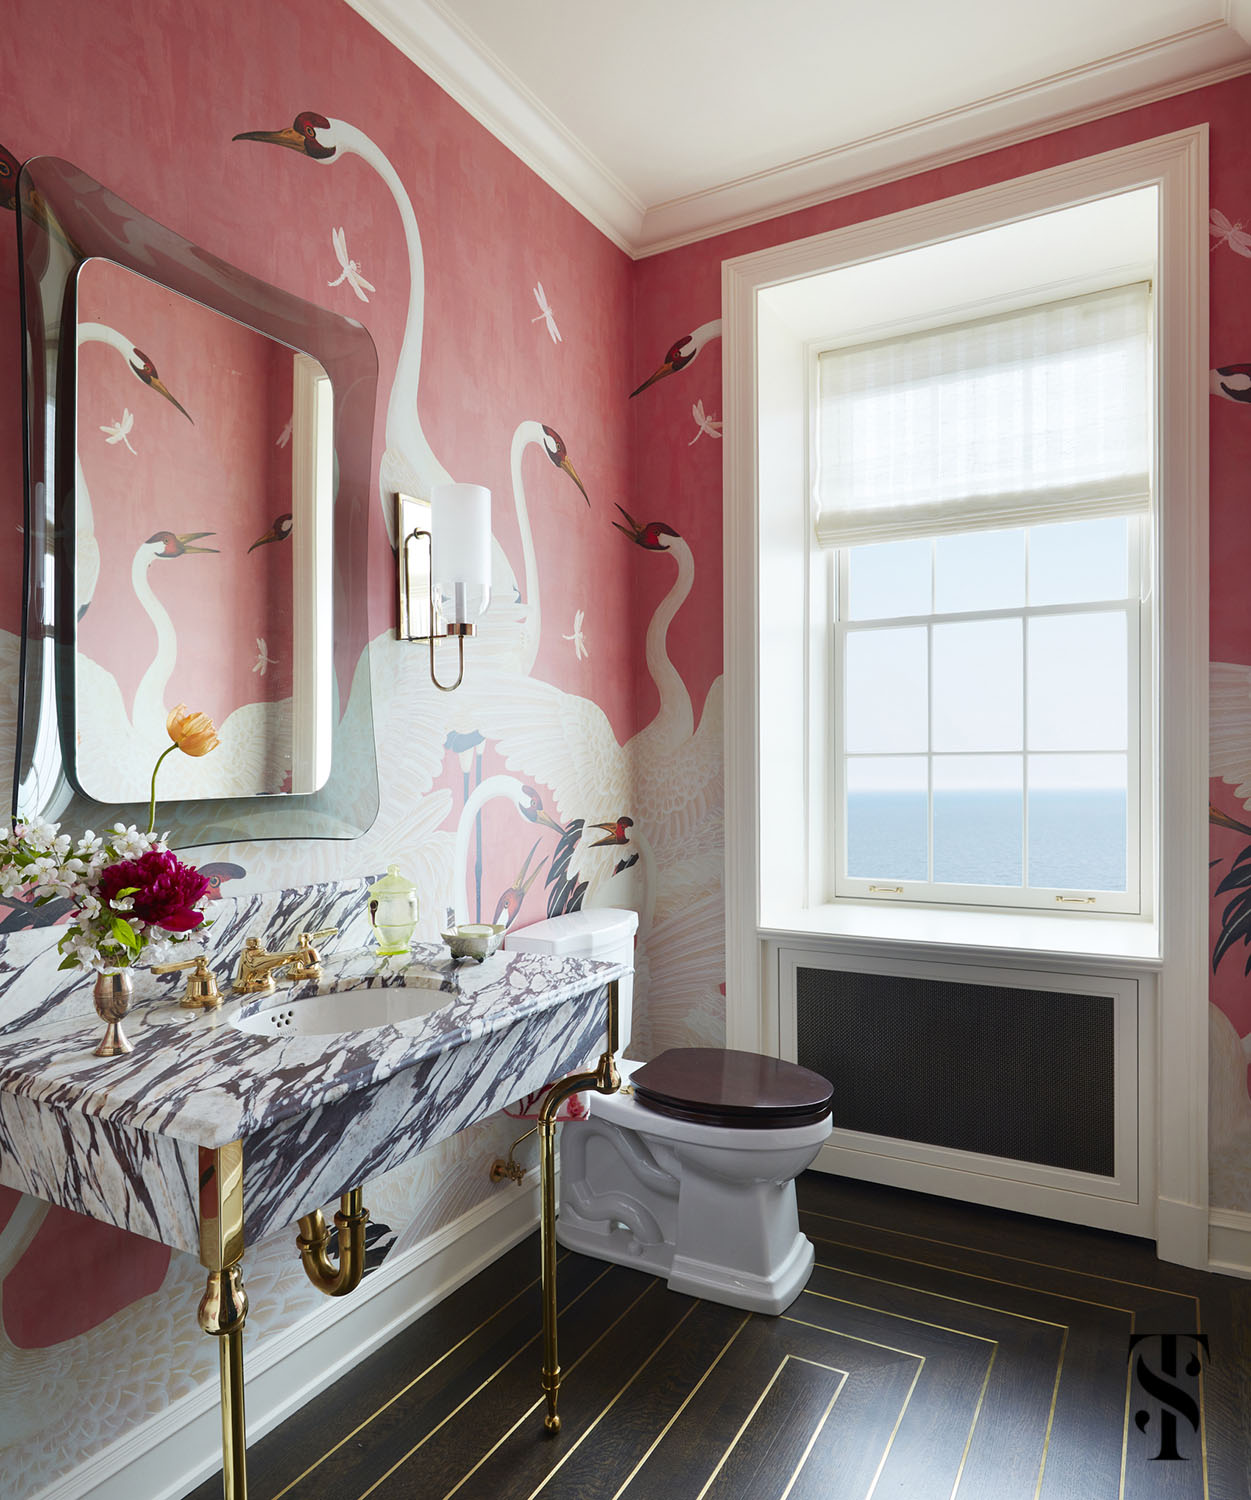 Summer Thornton designed this over-the-top powder room featuring pink herron birds by Gucci and flooring with brass inlays in concentric rectangles.